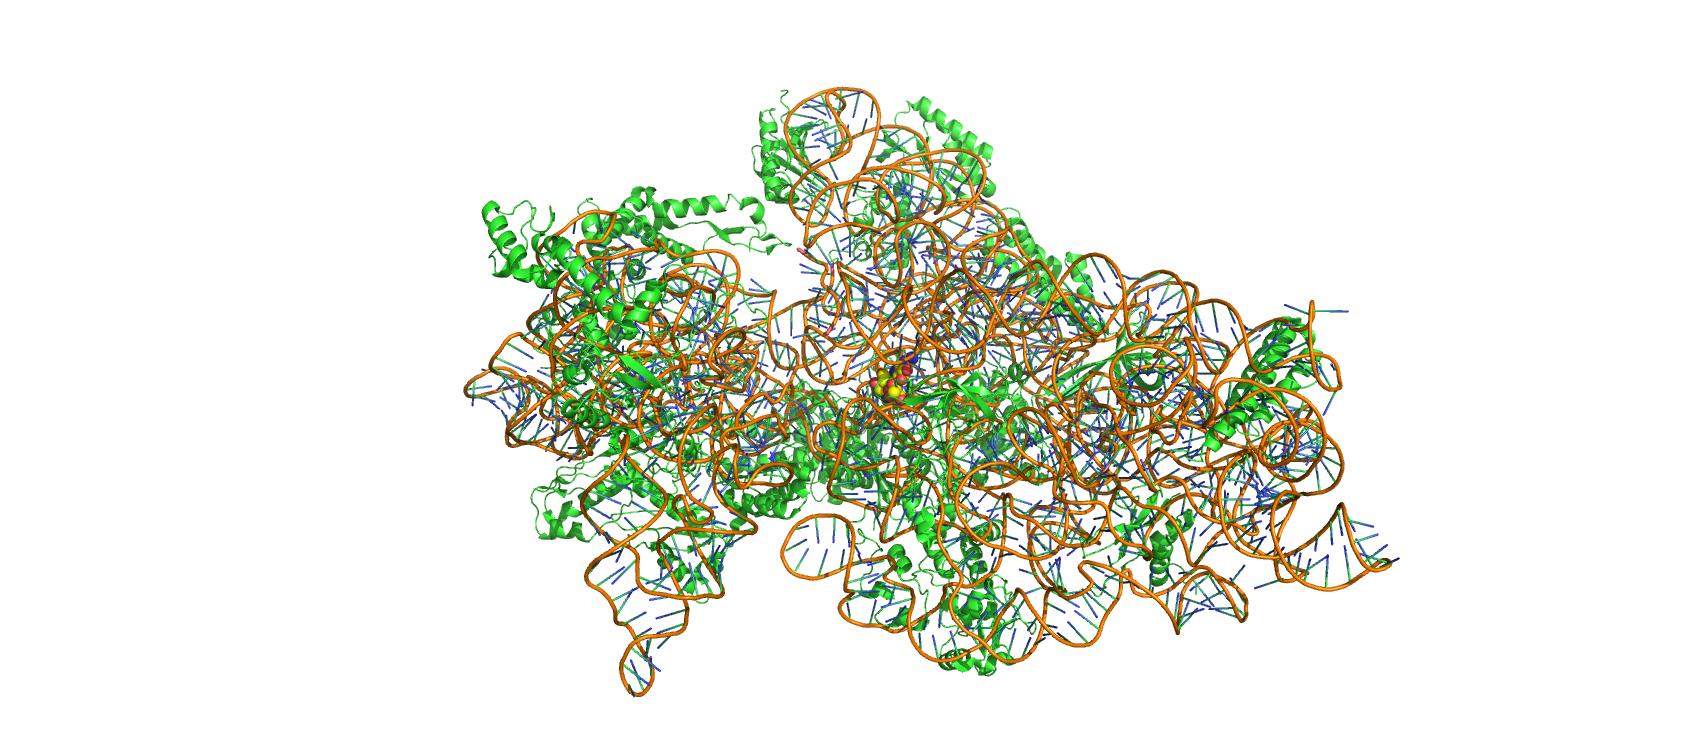 Structure of Thermus thermopiles 30S ribosomal subunit in complex with streptomycin (spheres, center). Made with Pymol from PDB entry 1FJG.